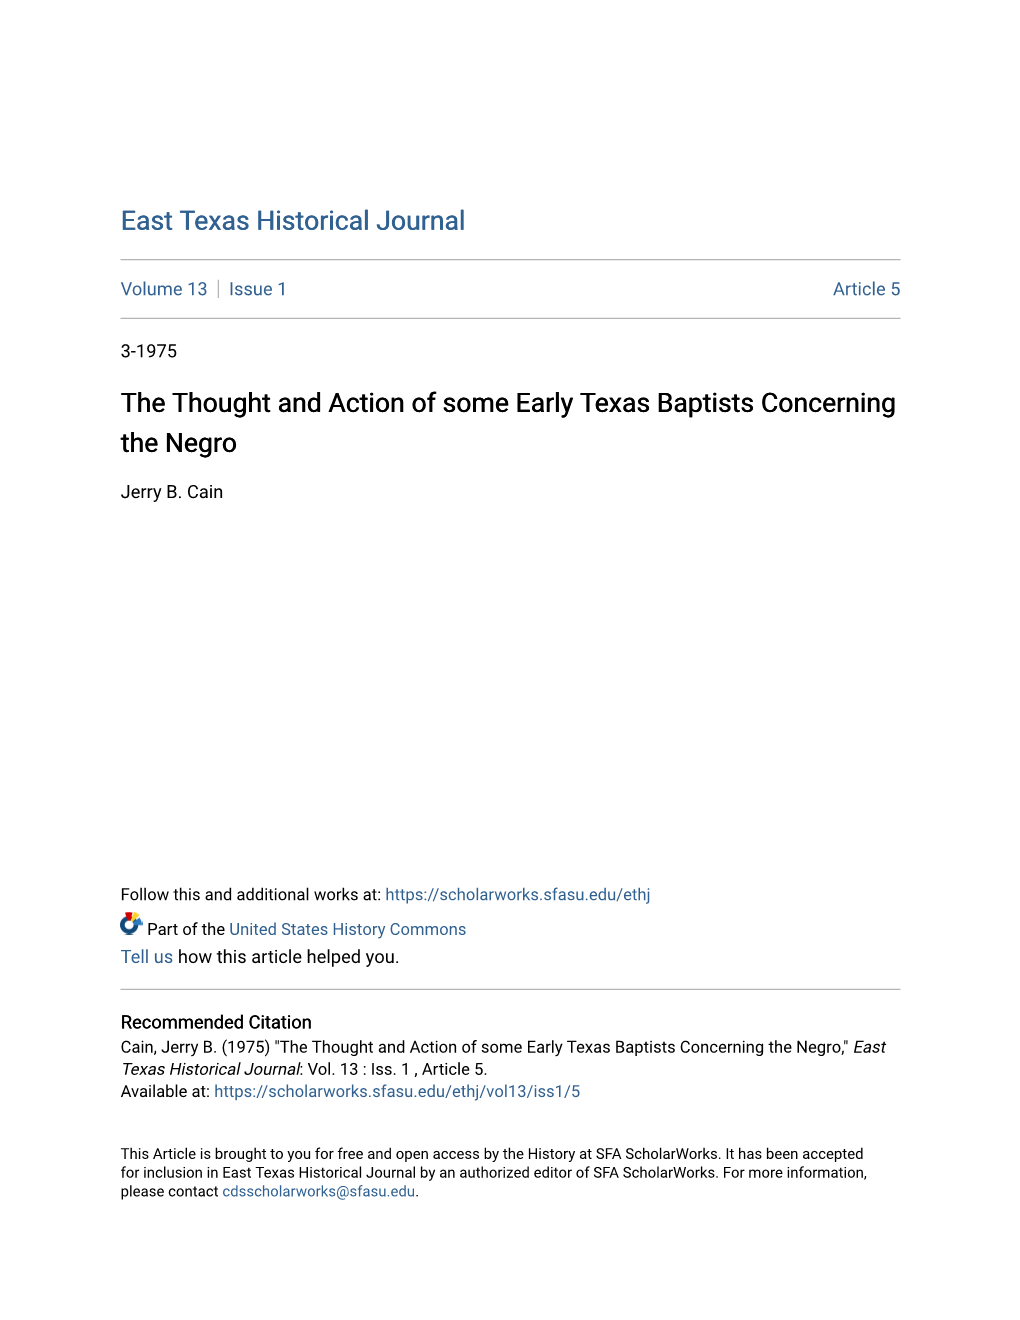 The Thought and Action of Some Early Texas Baptists Concerning the Negro